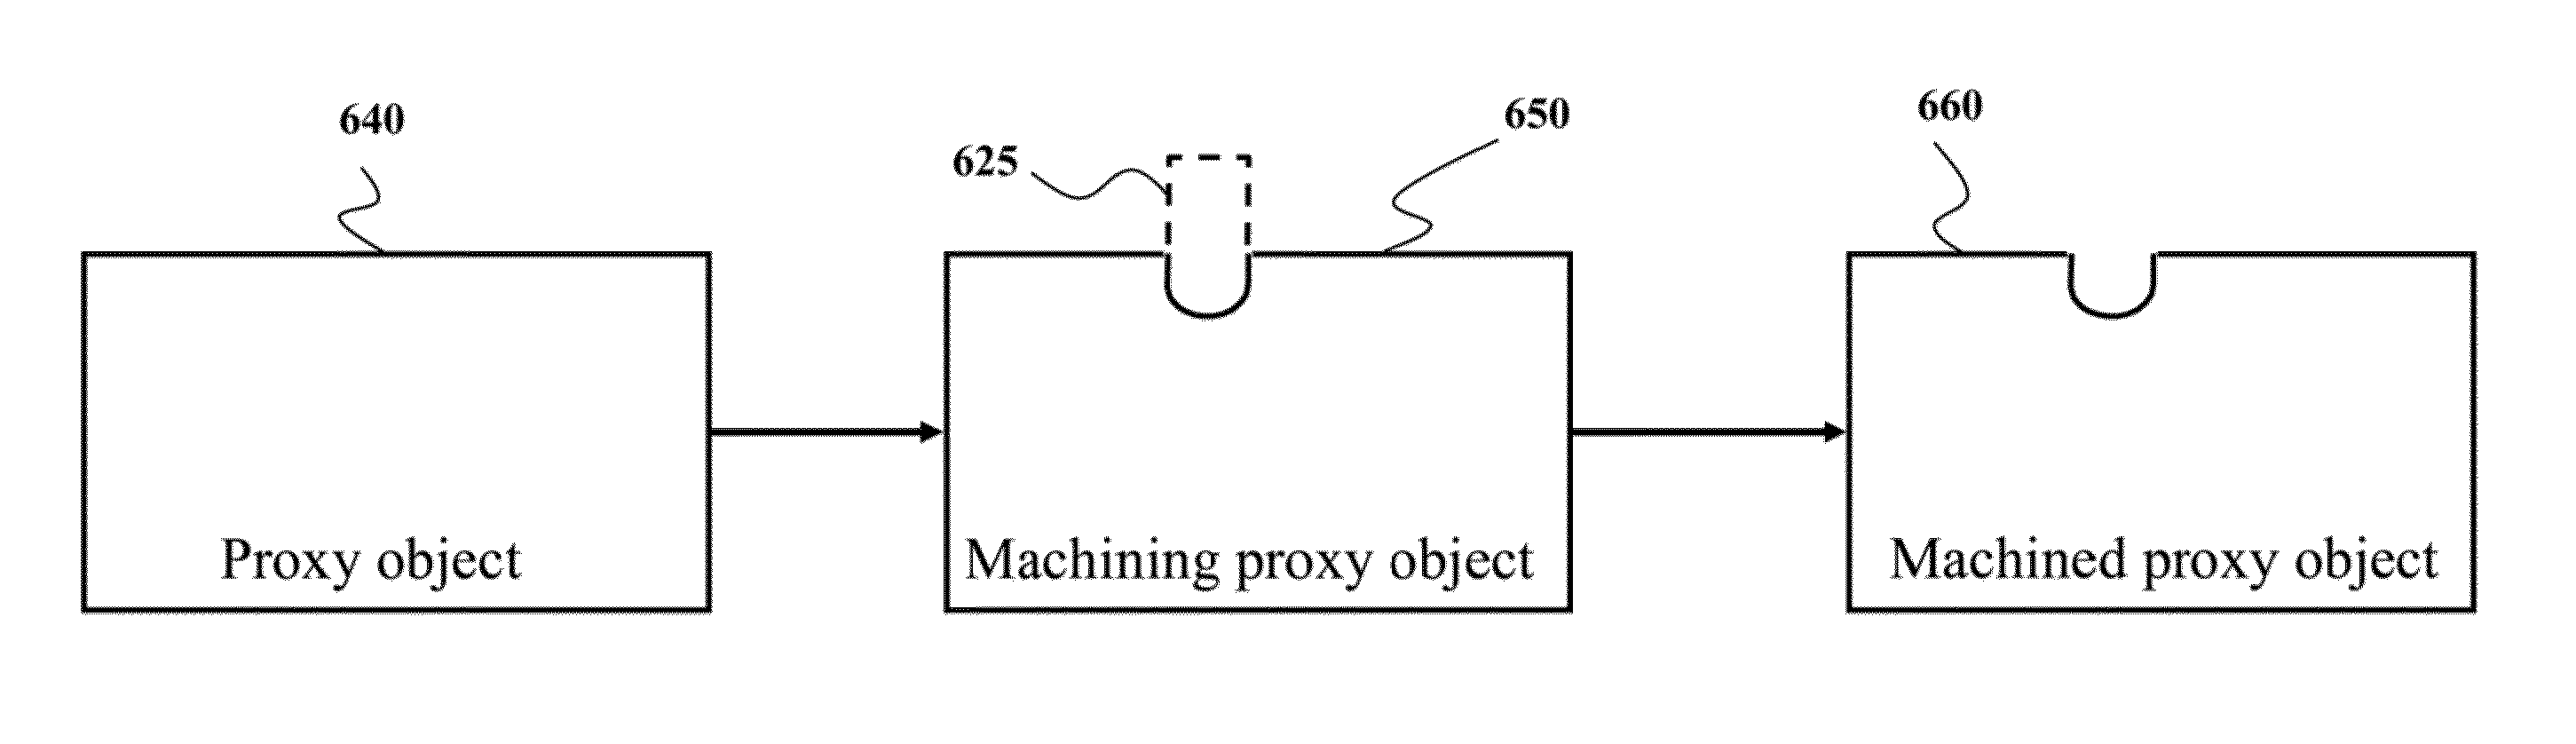 System and method for simulating machining objects